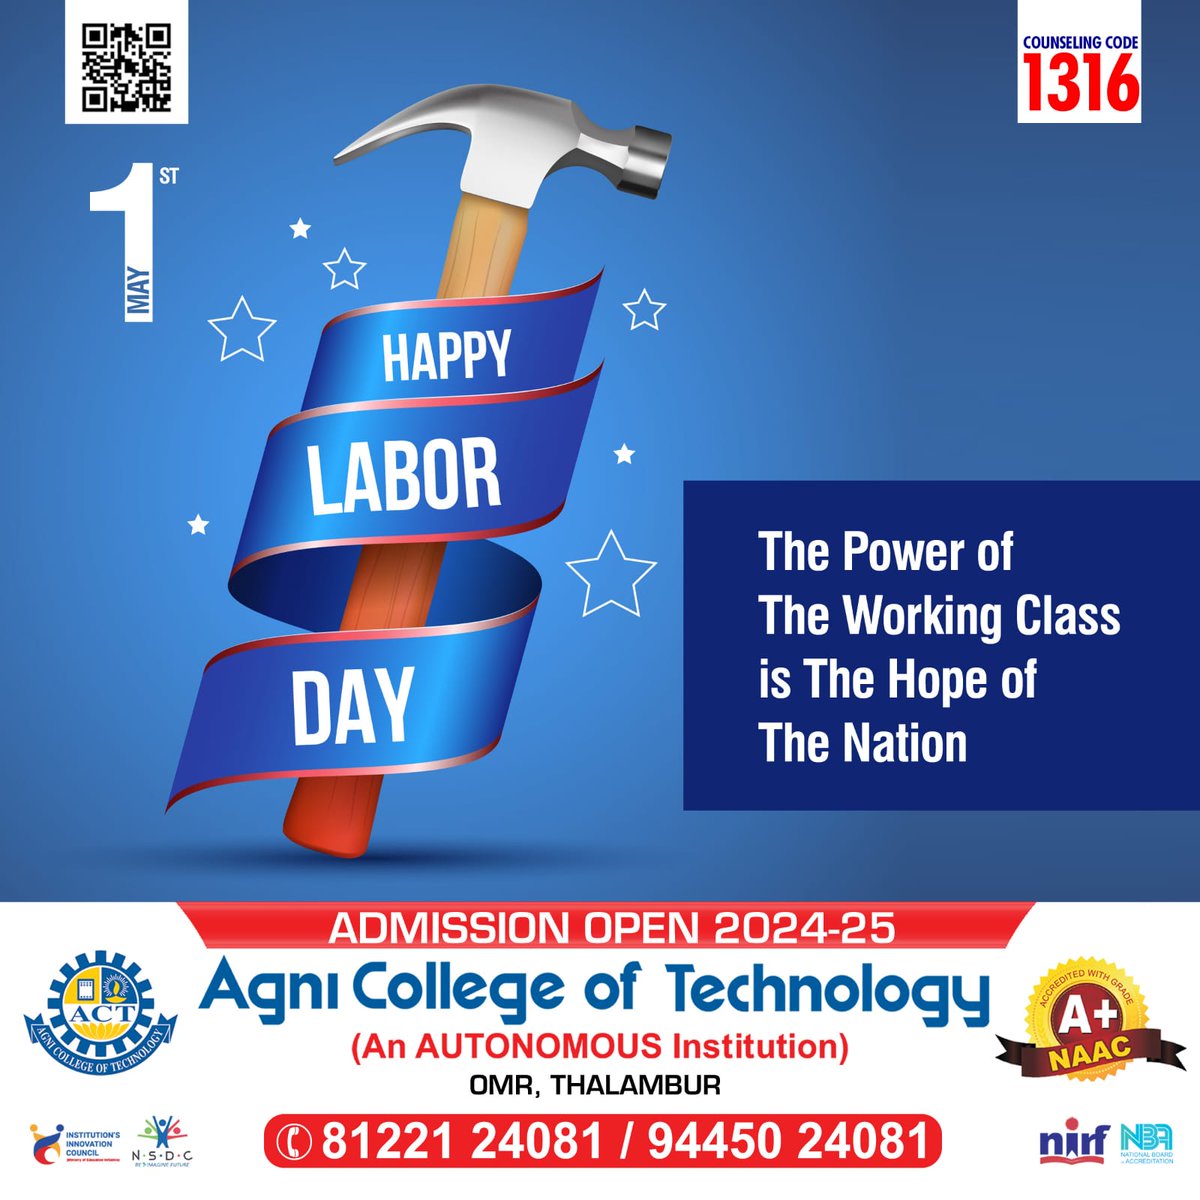 Happy Labor Day to all the hardworking individuals out there! Your dedication drives progress. 

#AgniCollegeofTechnology #LaborDay #WorkHard #CelebrateWorkers